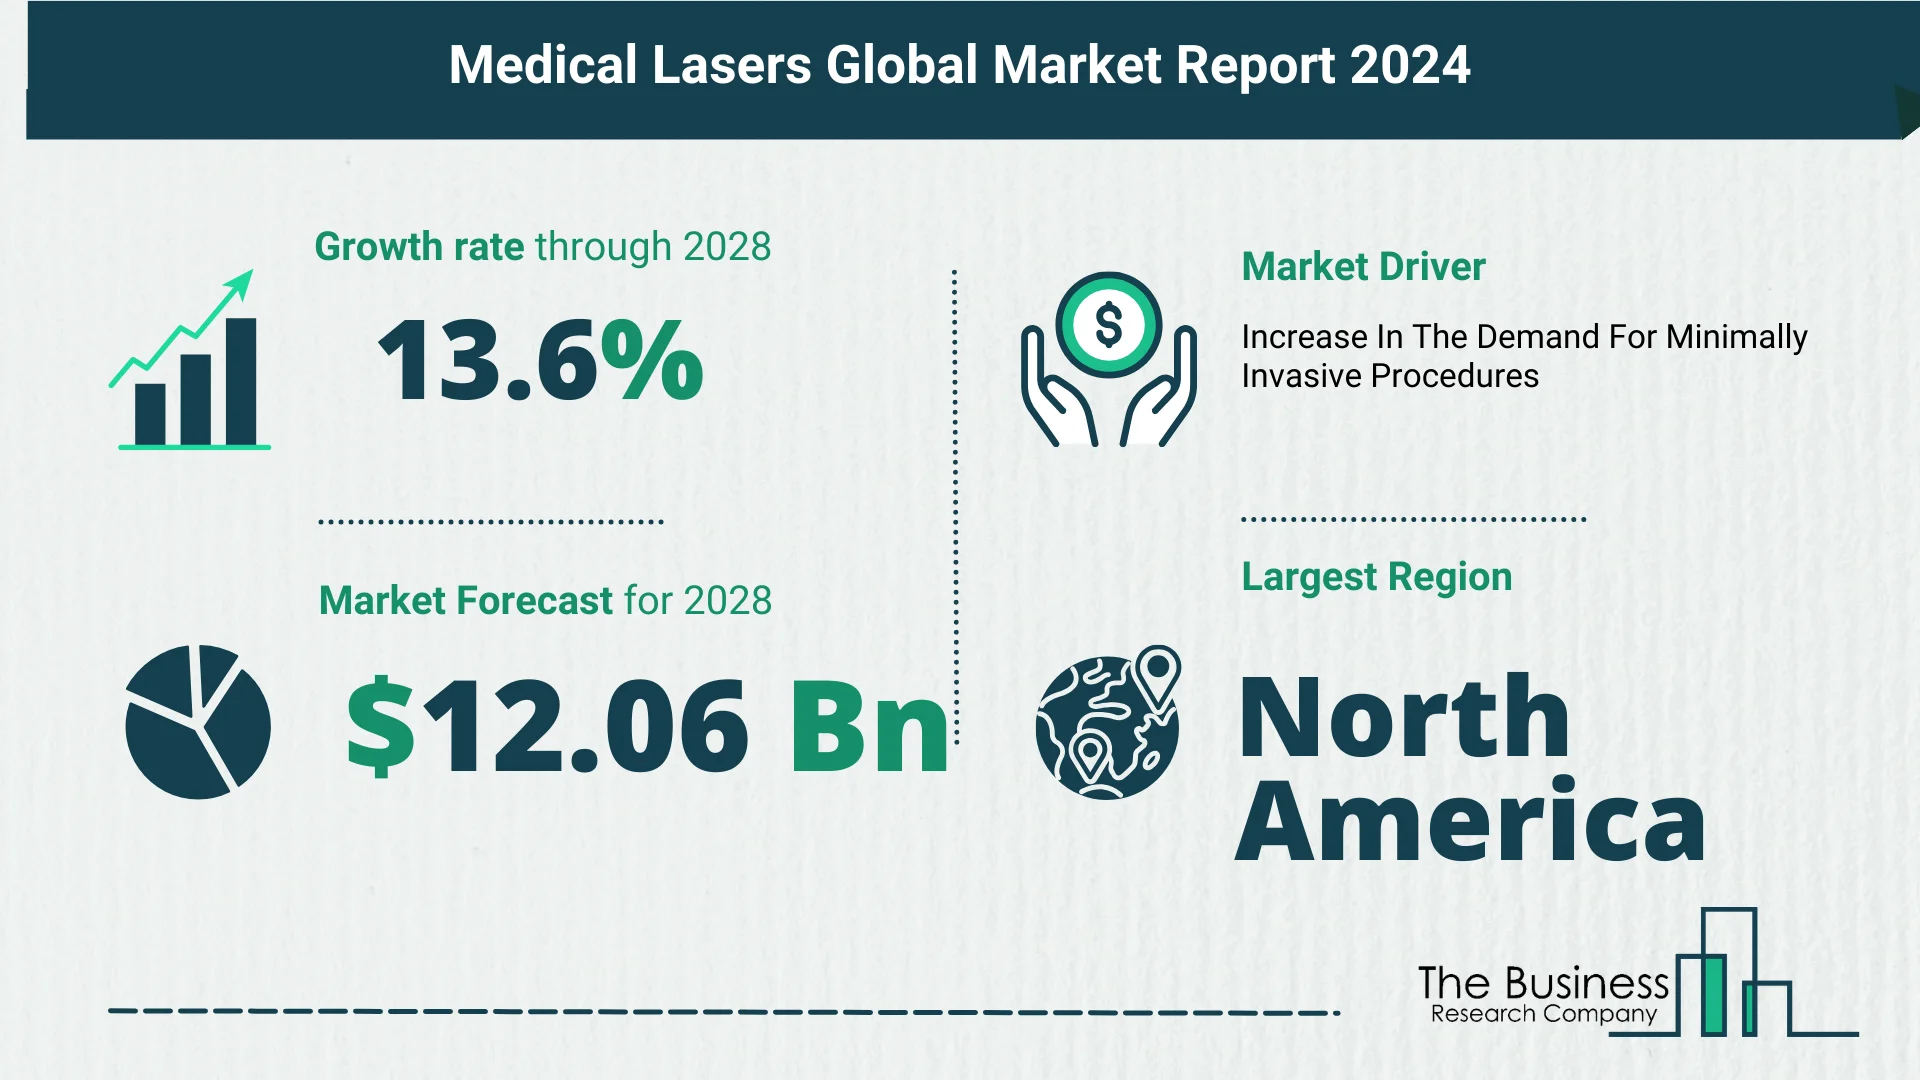 Top 5 Insights From The Medical Lasers Market Report 2024